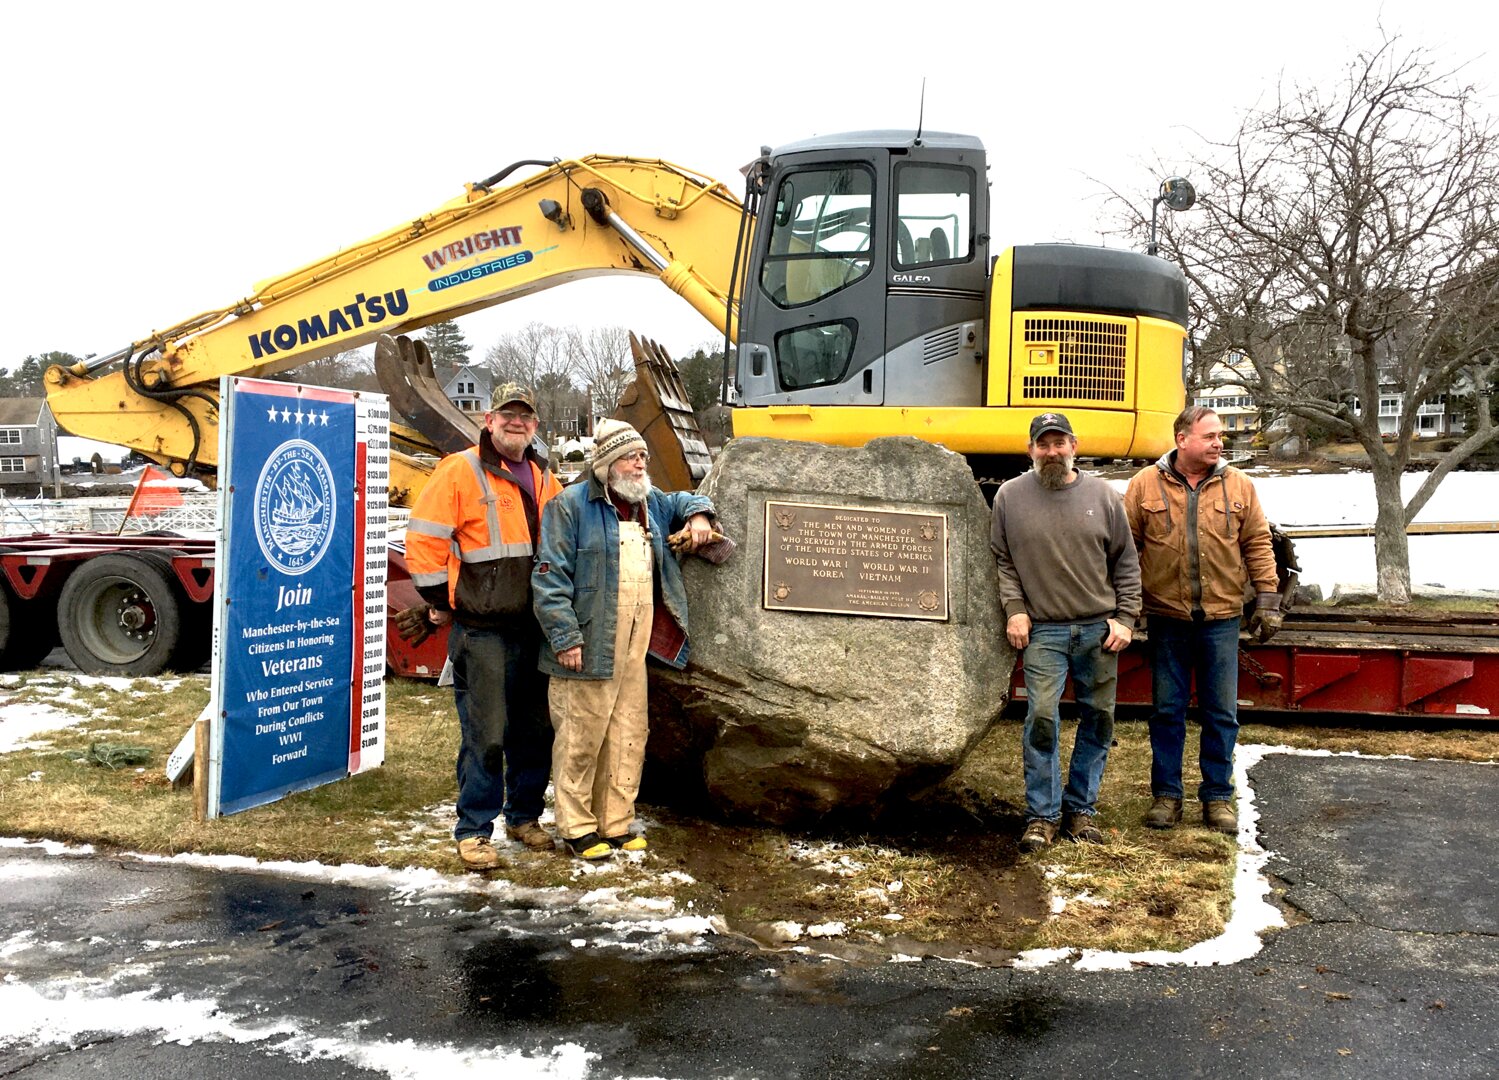 FEBRUARY | The moving of the old Veterans Memorial in Manchester quietly took place several weeks ago, thanks for a series of volunteers.  First up, the “before” shot, with the memorial boulder being “gurney’ed” in preparation for its journey to its new home in front of the Amaral Bailey American Legion Hall.   In the "after" second photo, from left to right, is Dave Doucette, John Saco, Bob Spintig and Paul Wright—all volunteers.  Spintig graciously provided and operated all the heavy equipment required from his company, Wright Industries.